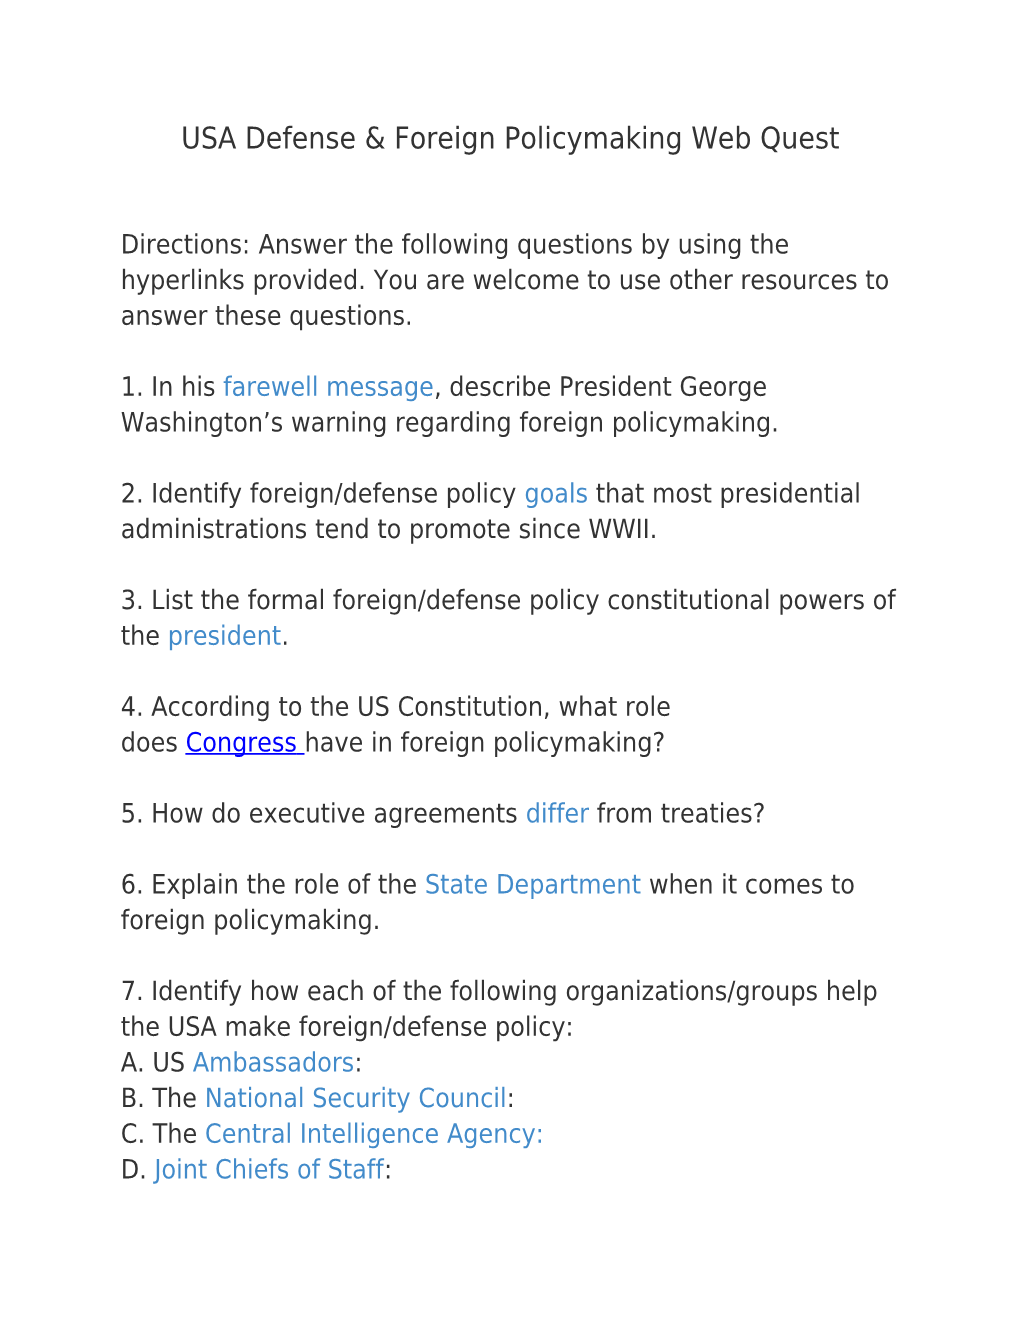 USA Defense & Foreign Policymaking Web Quest